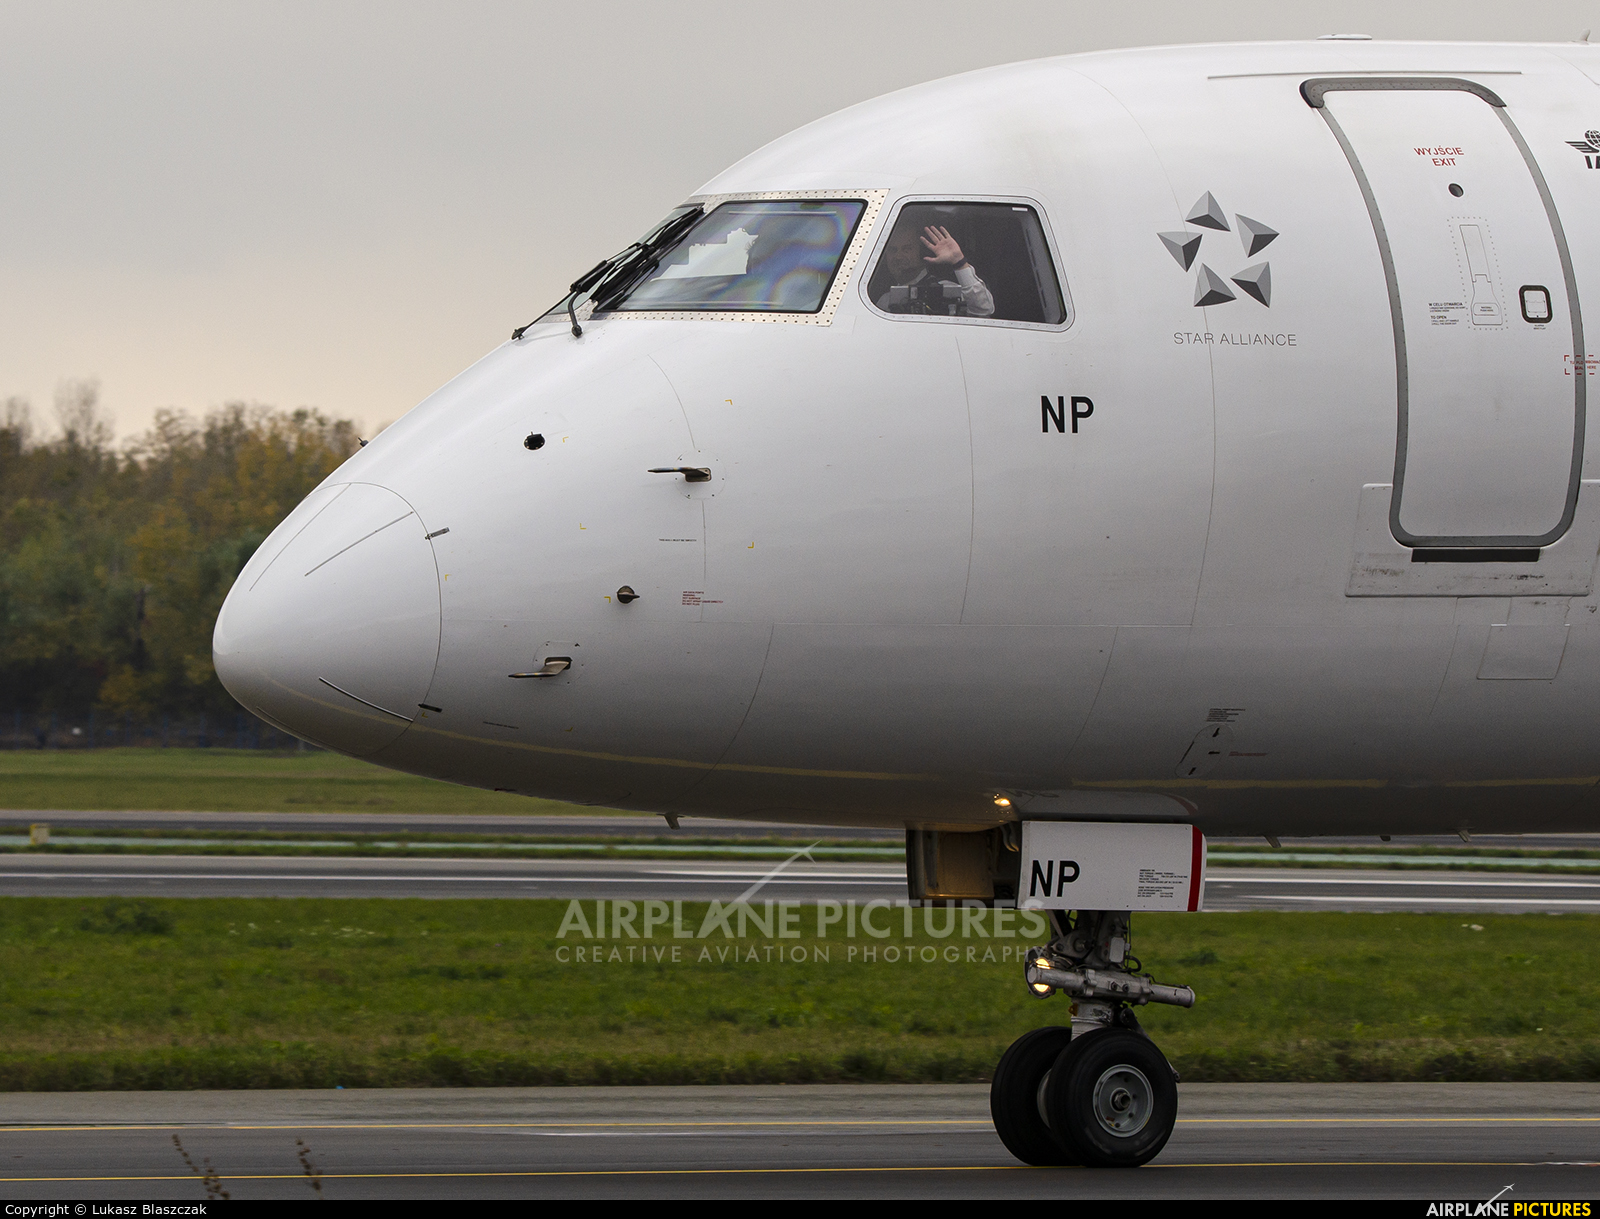 LOT - Polish Airlines SP-LNP aircraft at Warsaw - Frederic Chopin